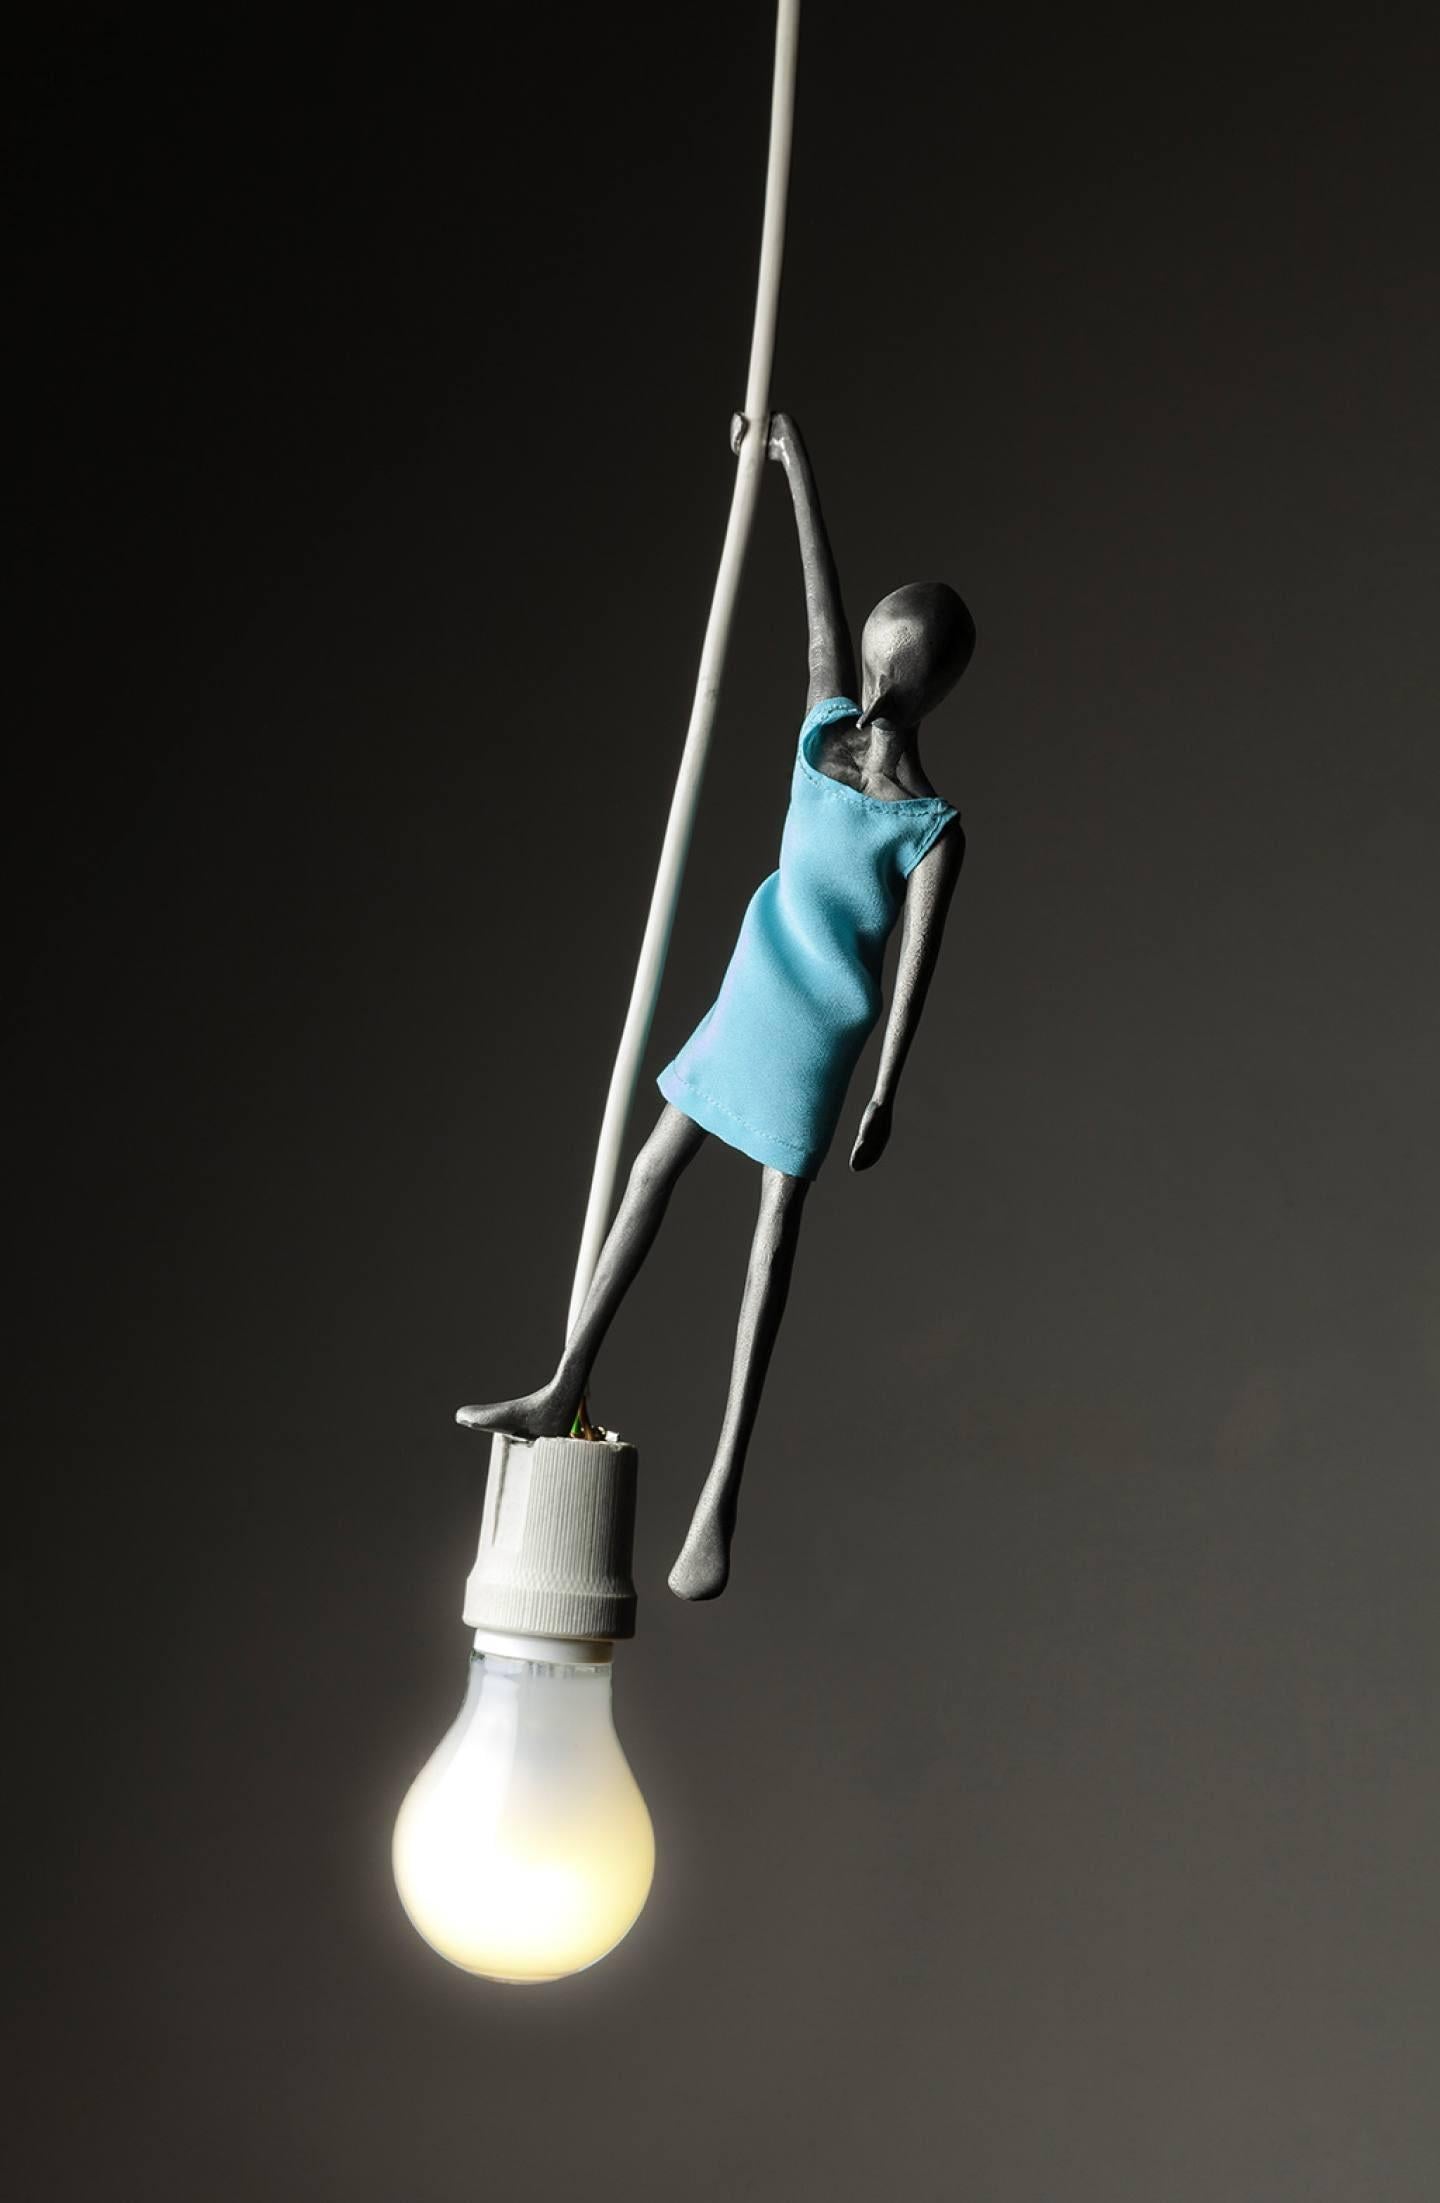 Pendent light made in lost-wax casting aluminium for Dilmos Milano. Alex Pinna created a collection of three pendent lights called Lampwick, Blue Fairy and Duo. This piece, Blue Fairy, is a small sculpture standing on a LED bulb. In all works of